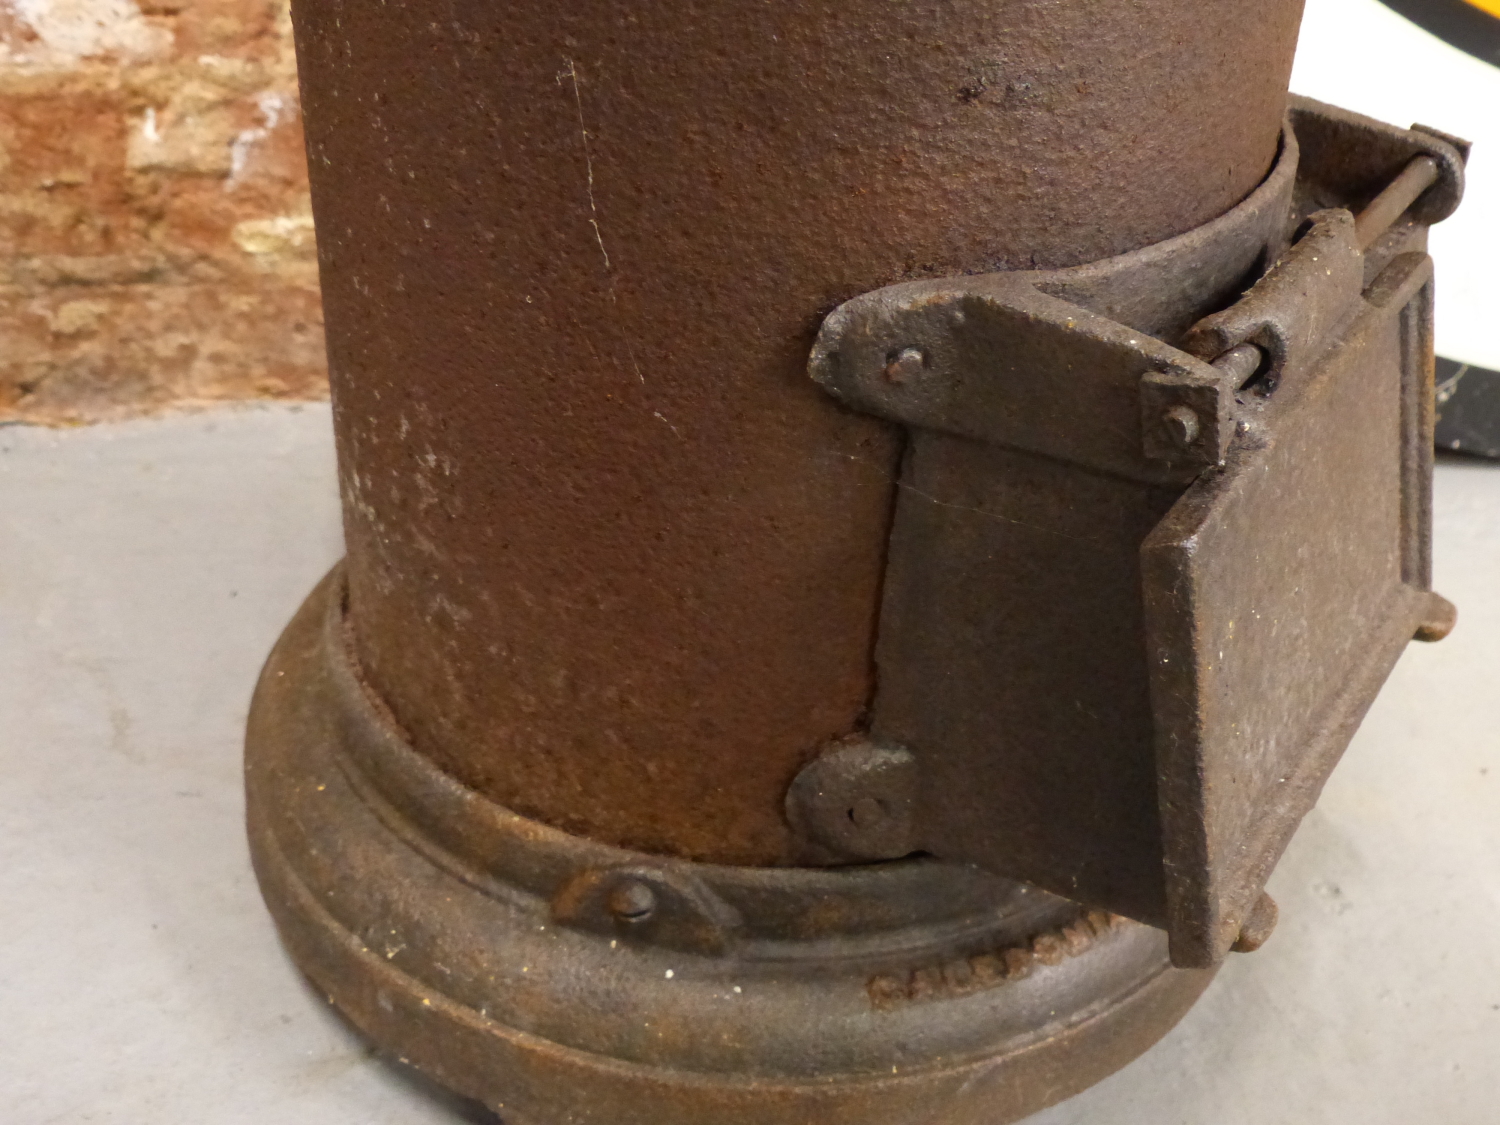 AN ANTIQUE CAST IRON TORTOISE STOVE FOR A SHEPHERDS HUT OR ROMANY WAGON. - Image 4 of 5